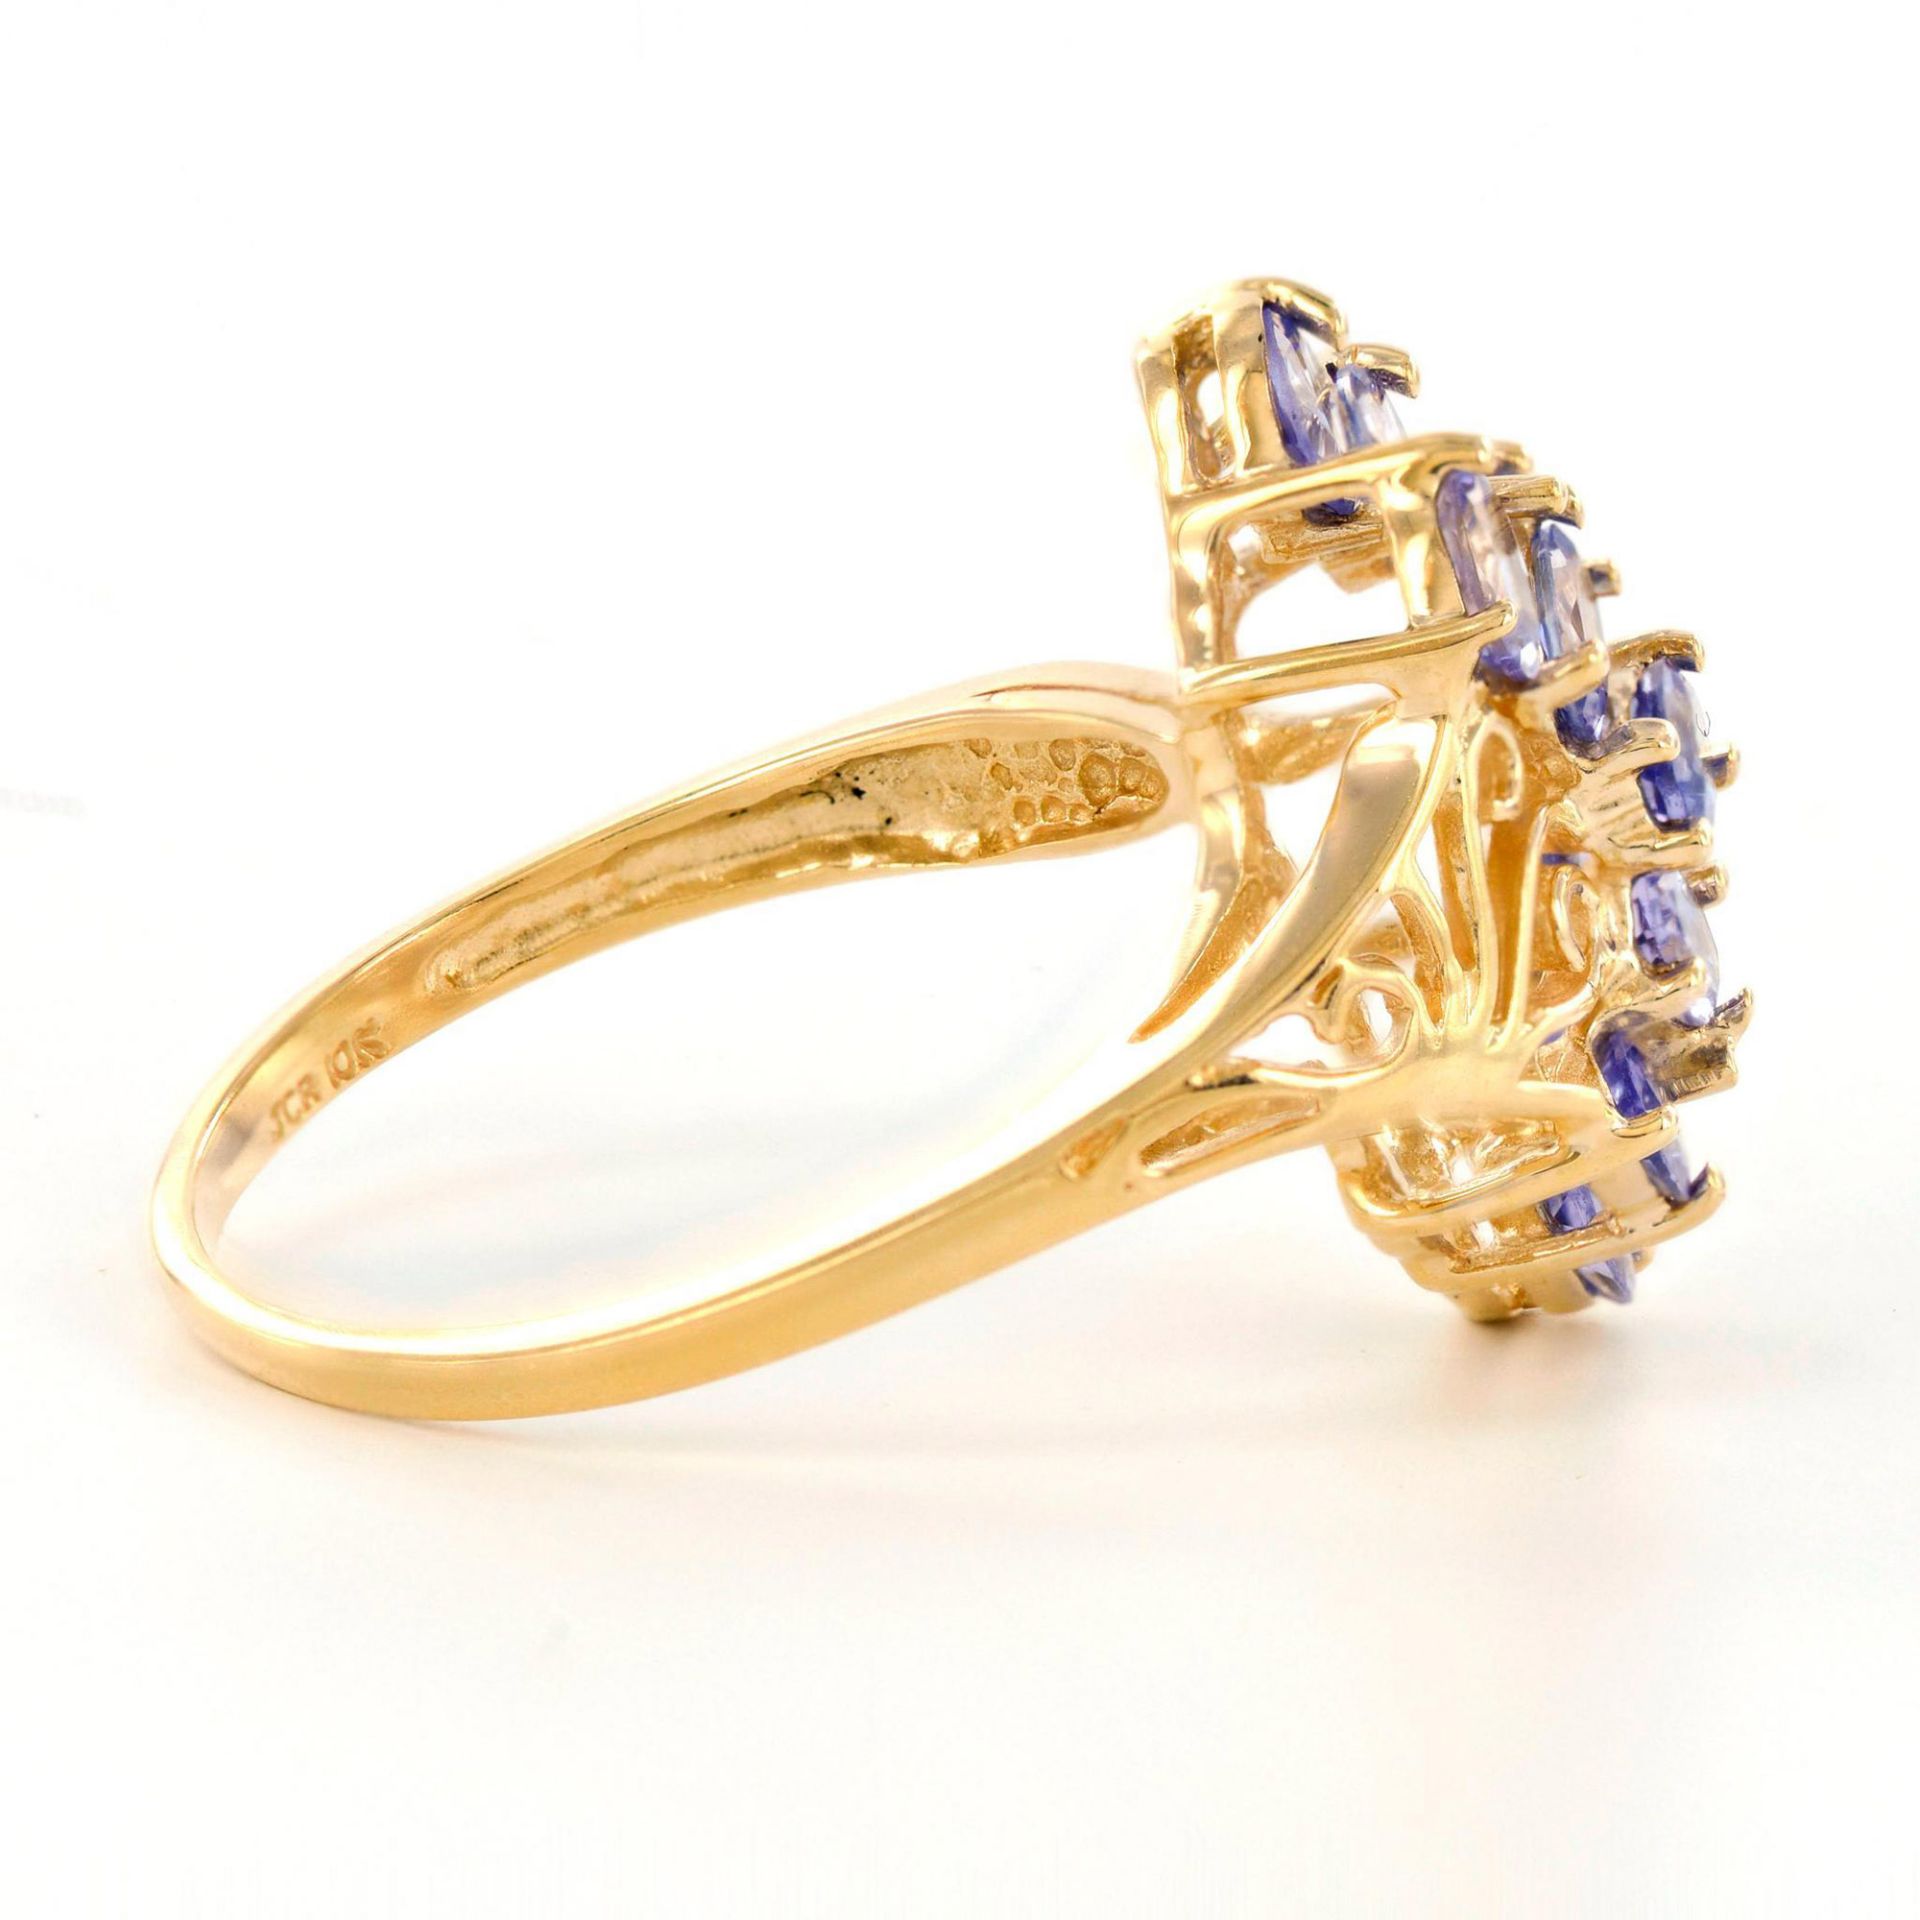 Beautiful 10K Yellow Gold with Lavender Blue Tanzanite Ring - Image 2 of 4